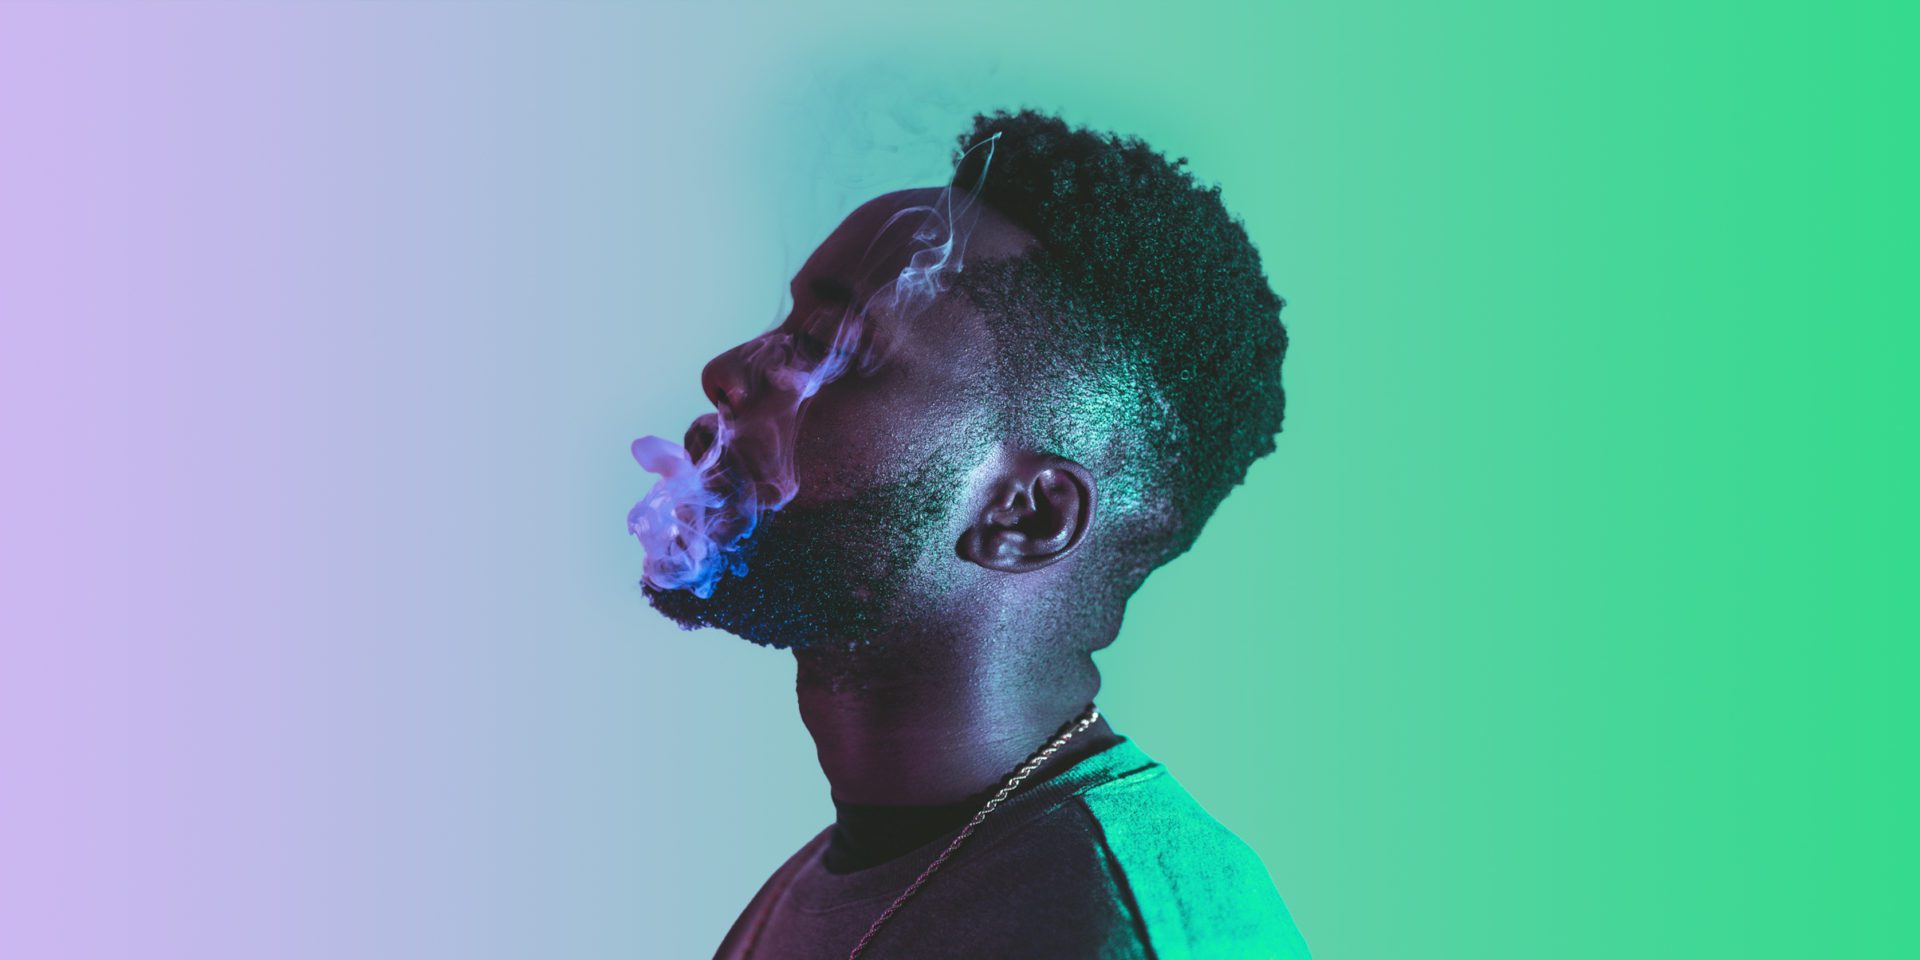 closeup photo of black man blows smoke out of his mouth in a purple green gradient background